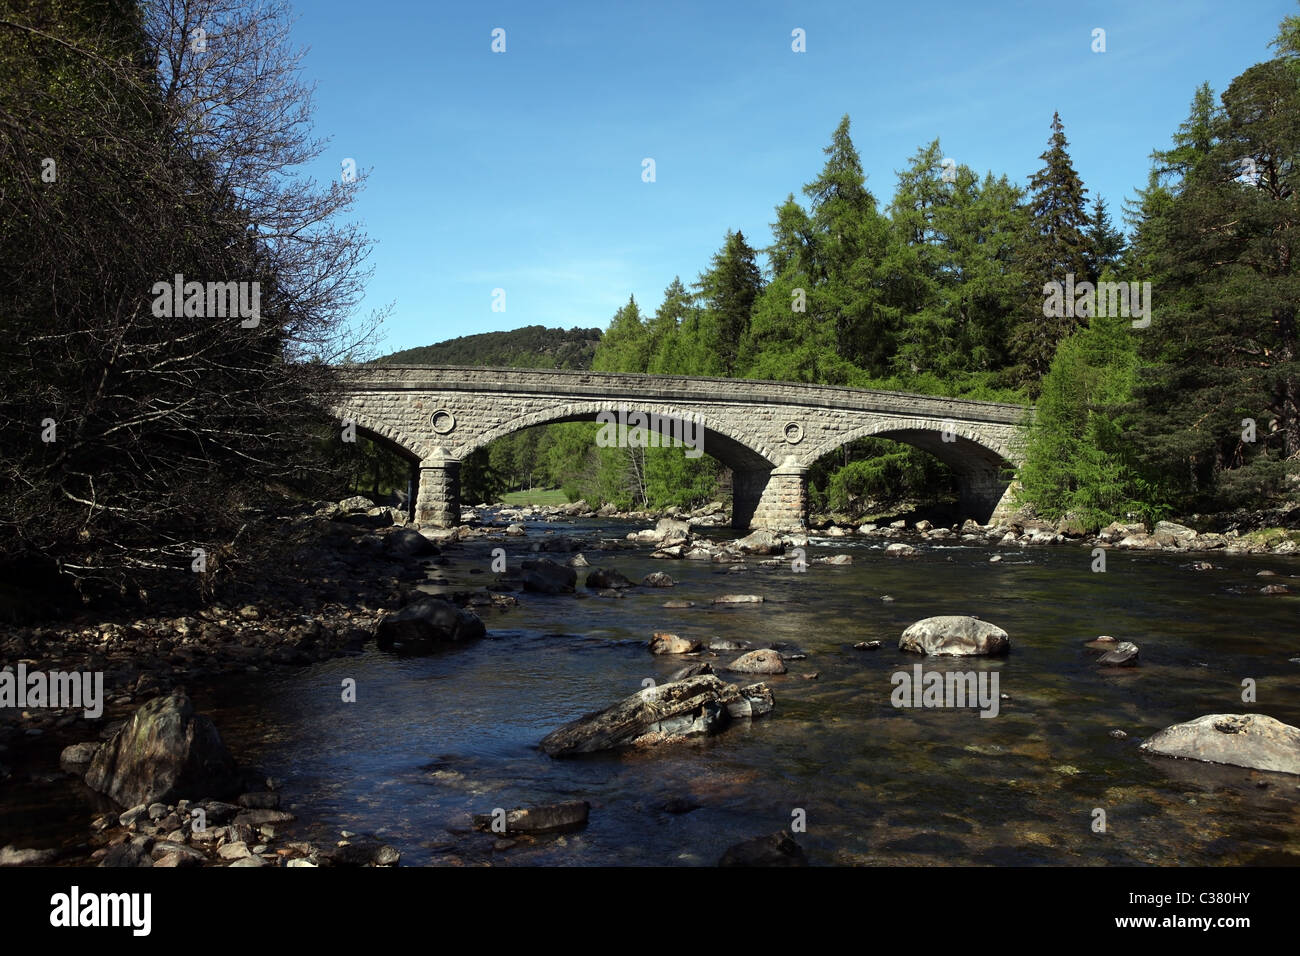 The new Invercauld Bridge commissioned by Prince Albert over the River Dee near Braemar in Aberdeenshire, Scotland, UK Stock Photo